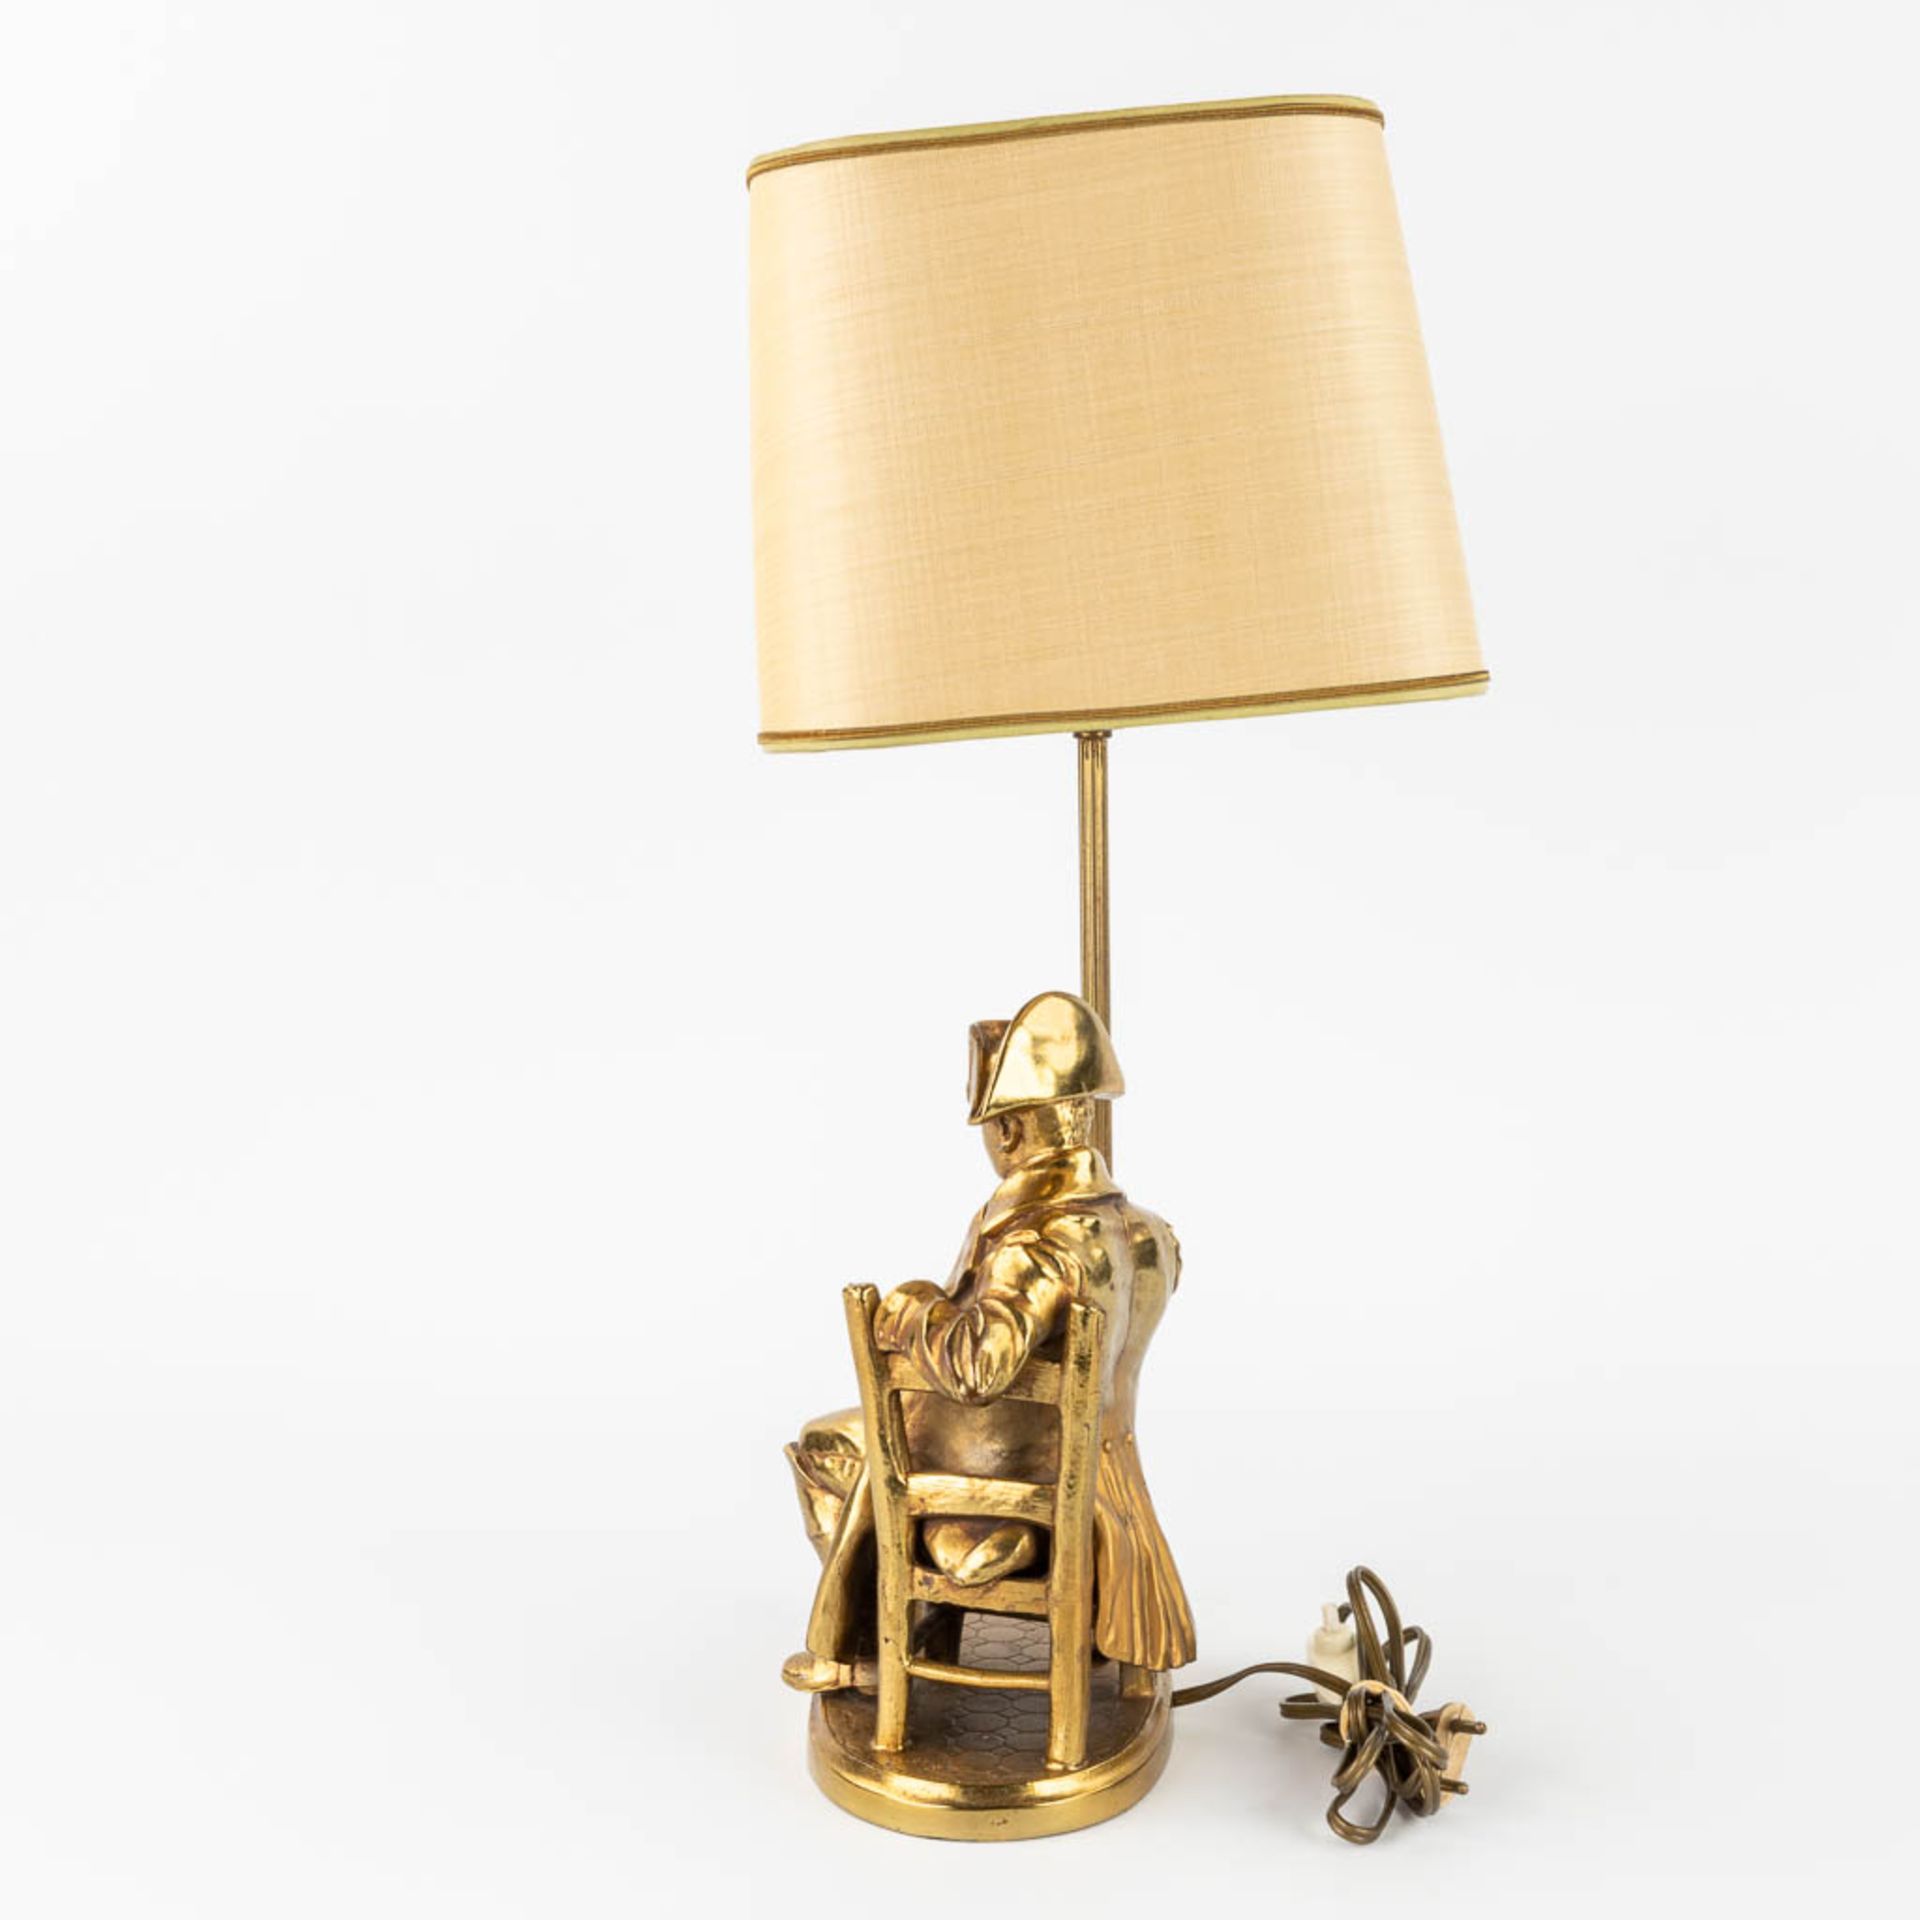 A collection of 2 table lamps with statues of Napoleon Bonaparte. (H:38 cm) - Image 13 of 18